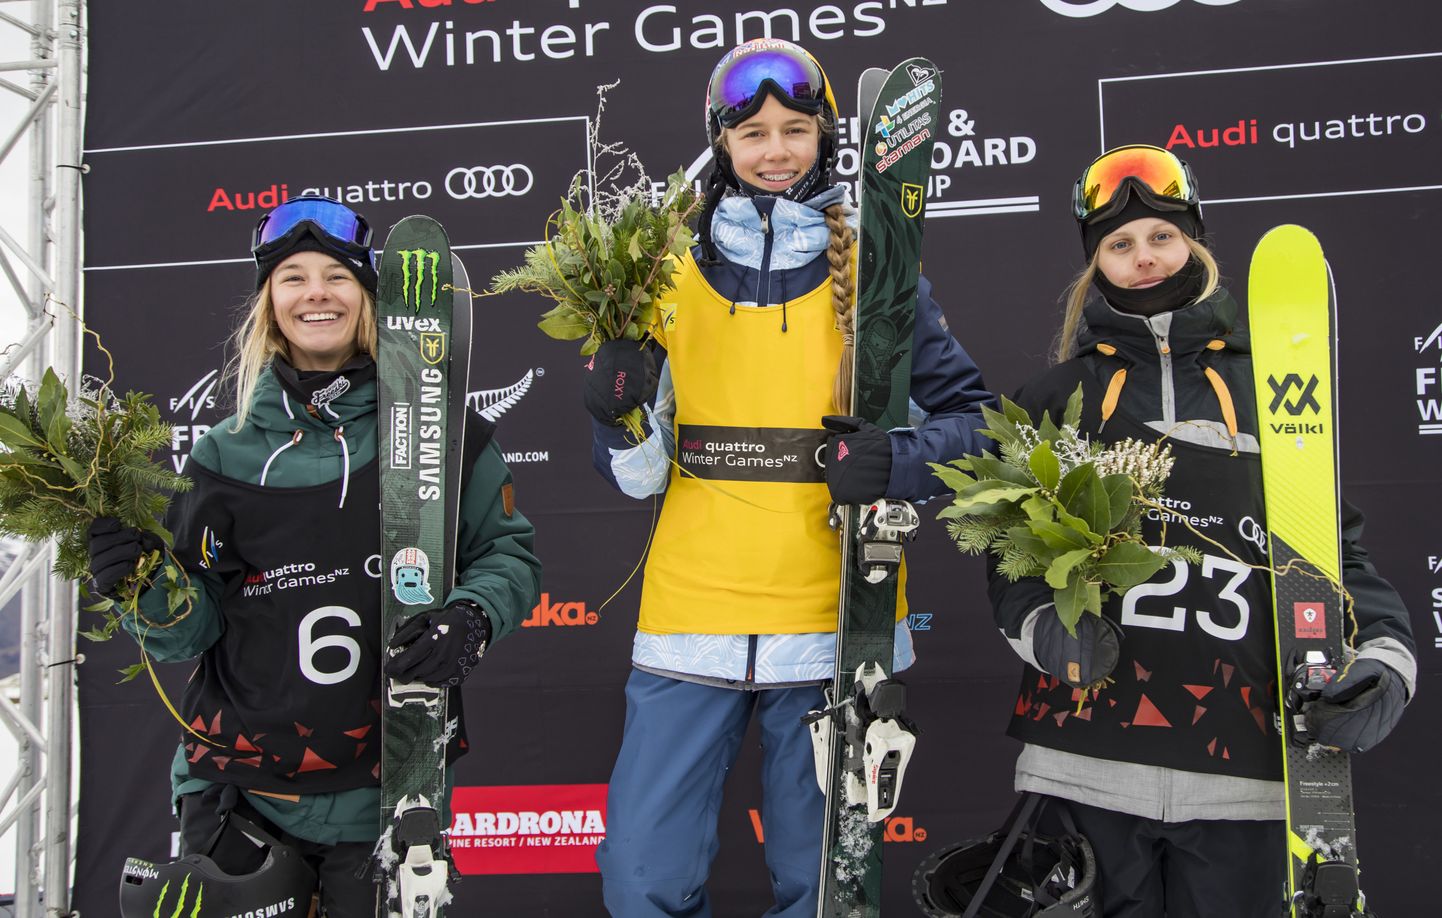 Winter Games New Zealand women's ski slopestyle final winner Kelly Sildaru of Estonia, centre, stands with second placed Jennie-Lee Burmansson of Sweden, left, and third placed Giulia Tanto of Switzerland on the podium during the flower ceremony at Cardrona ski resort in Queenstown, Sunday, Aug. 27, 2017. (Neil Kerr/Winter Games NZ via AP)